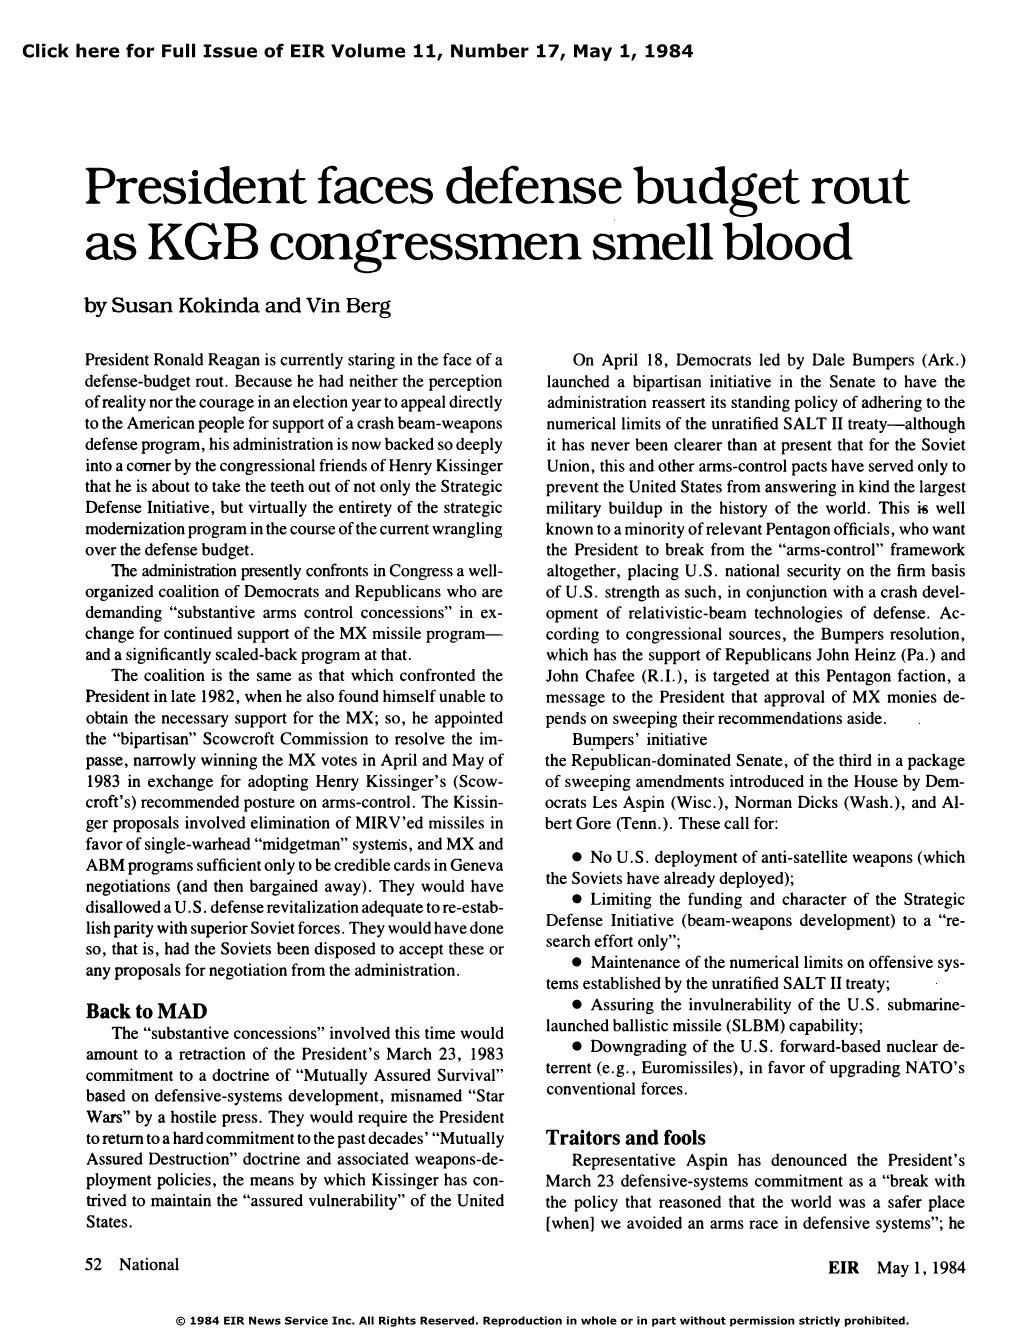 President Faces Defense Budget Rout As KGB Congressmen Smell Blood